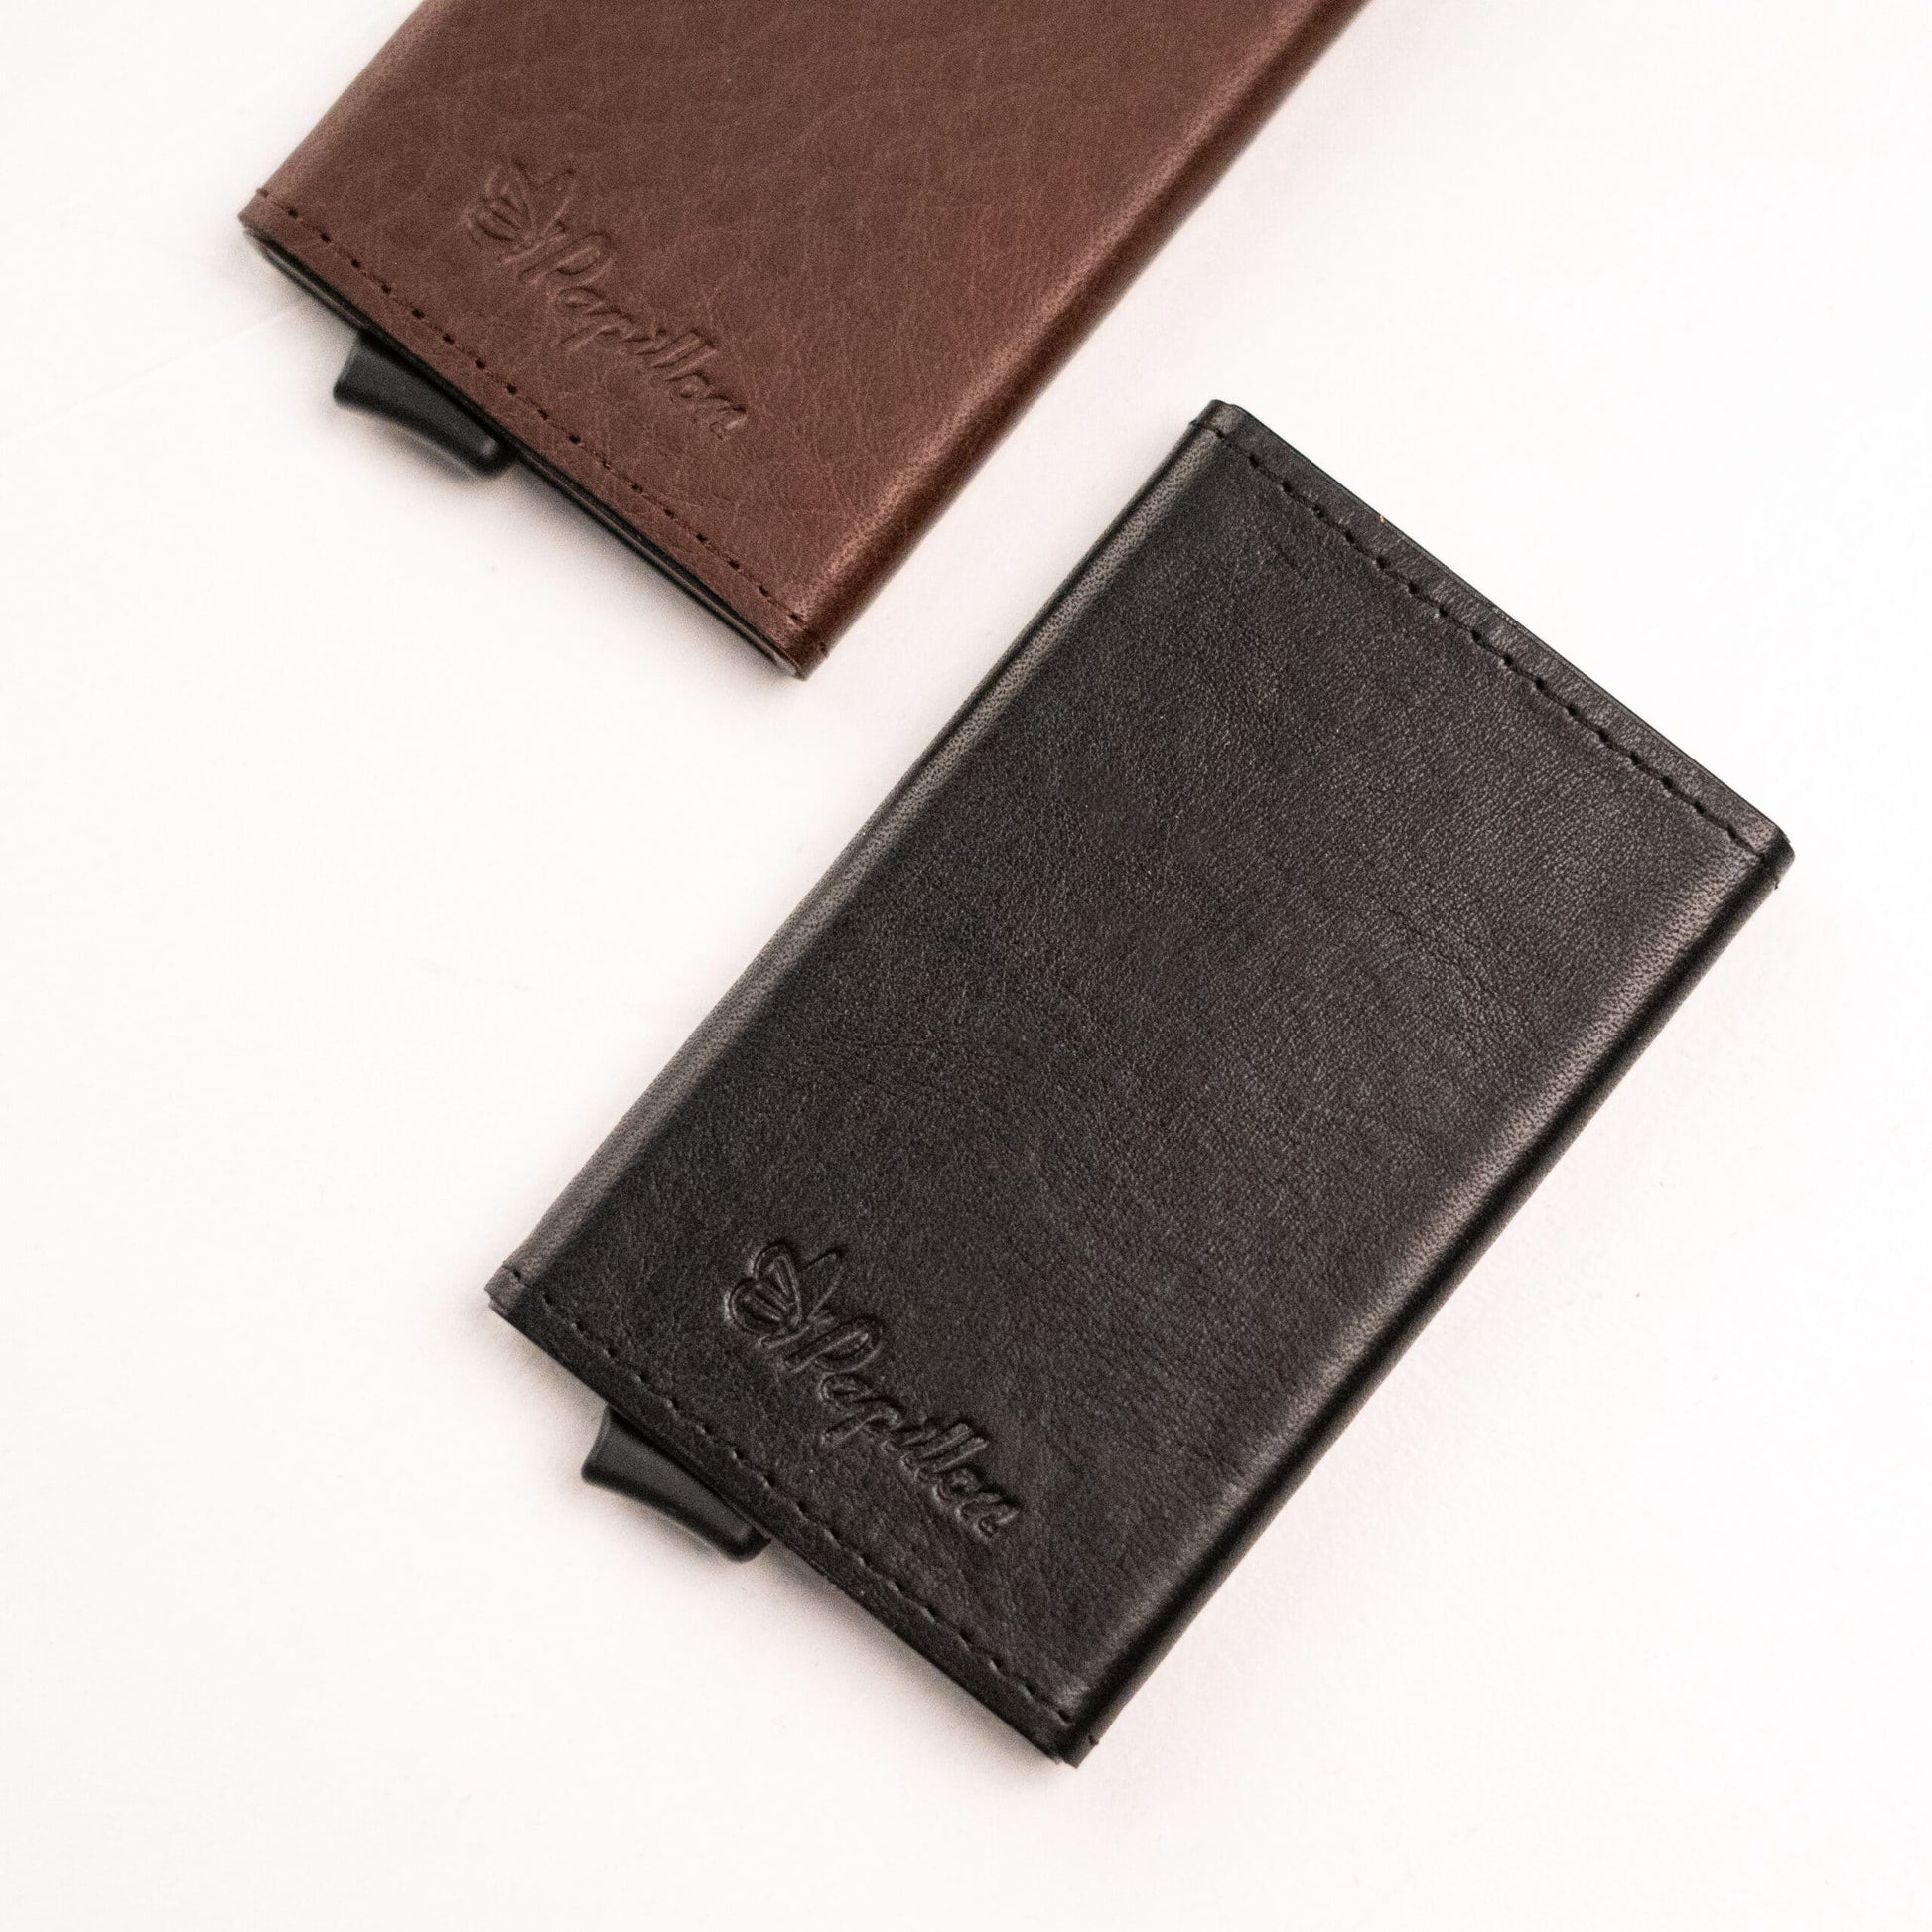 Card Holder (6 Cards) - Genuine leather and aluminum RFID/NFC blocking wallet. Sleek design with easy card access and durable craftsmanship. From Men In Style.